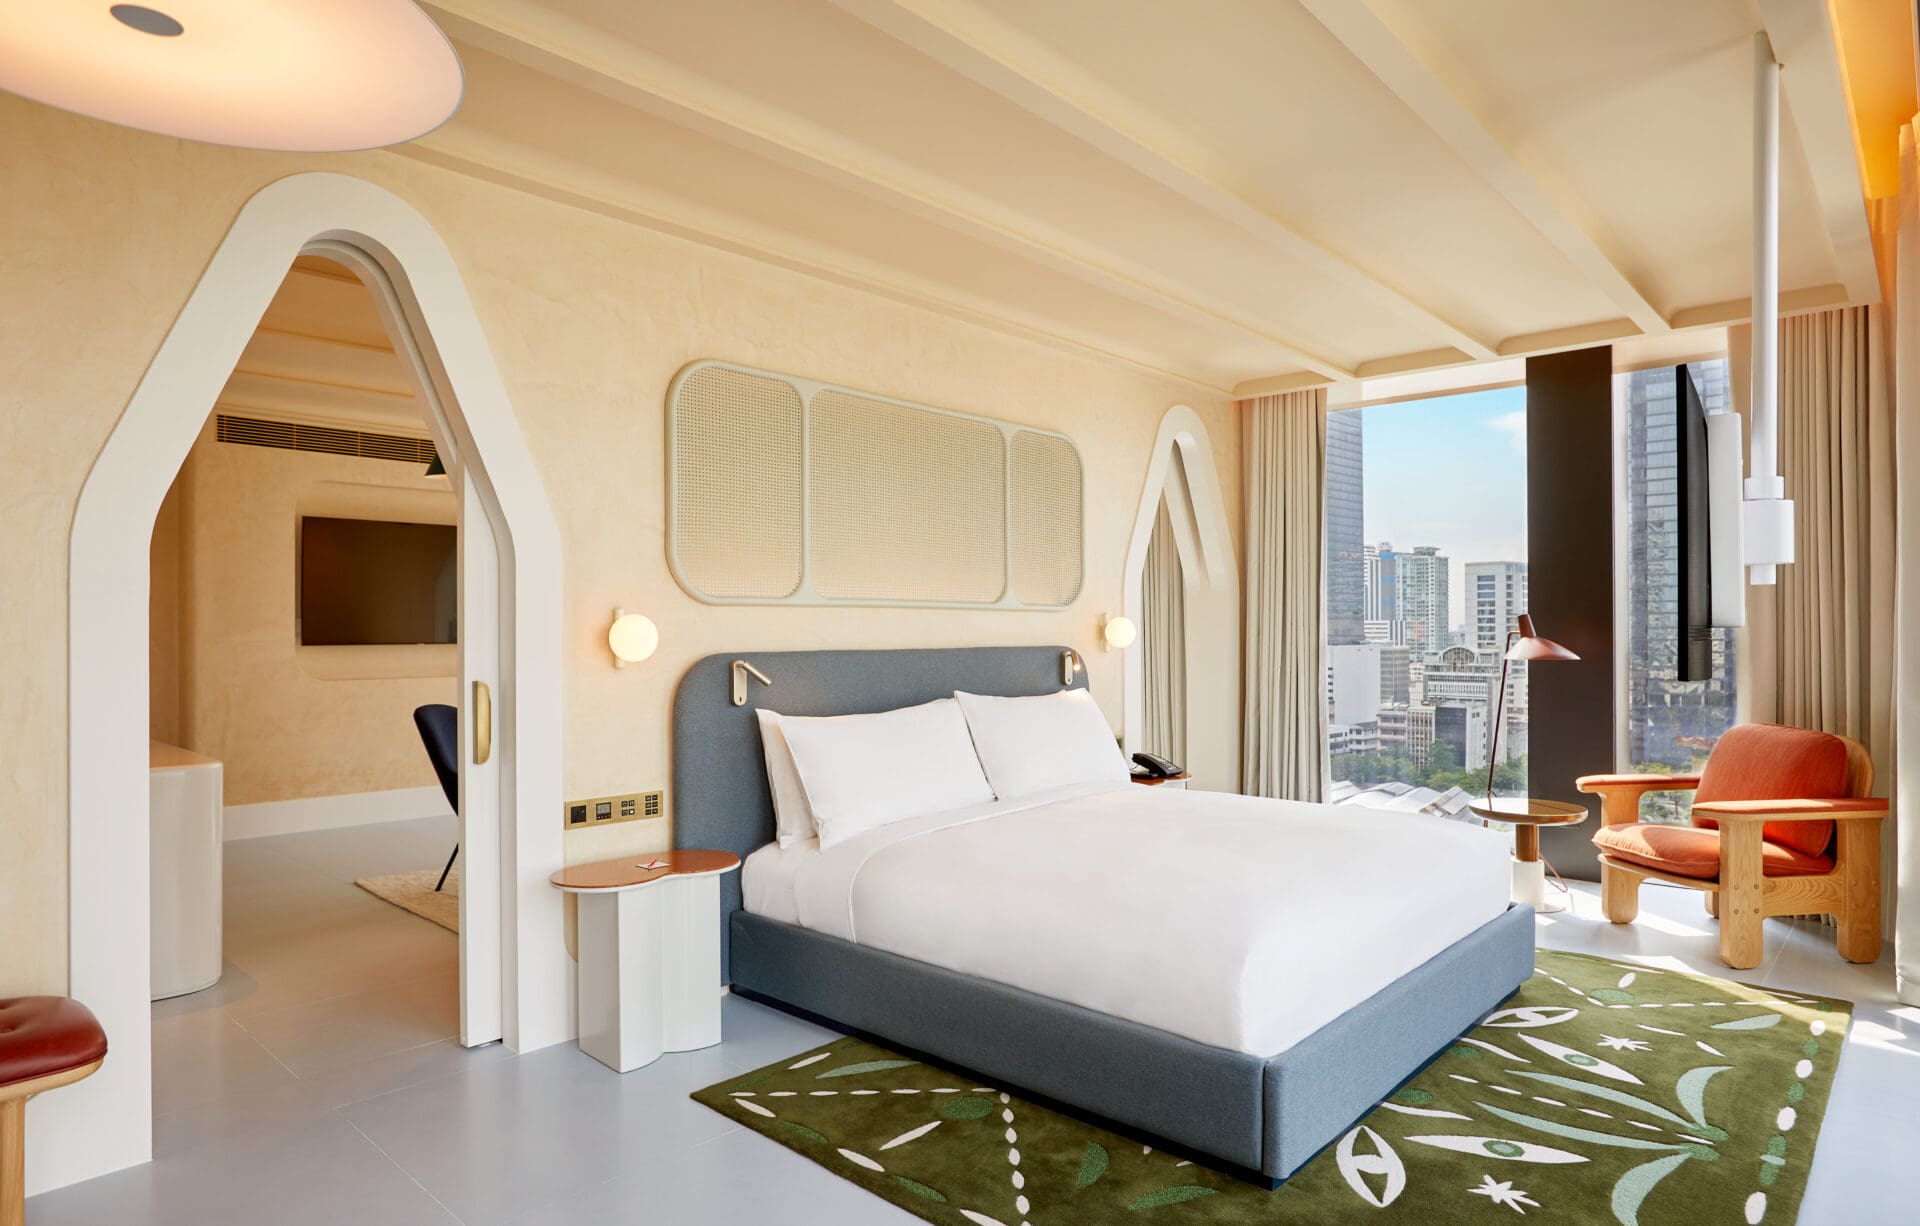 Best new hotels for summer 2022 | a big white bed with blue upholstered headboard sits in a suite at The Standard Bangkok, with a patterned green rug, and an arch-shaped doorway and floor-to-ceiling windows